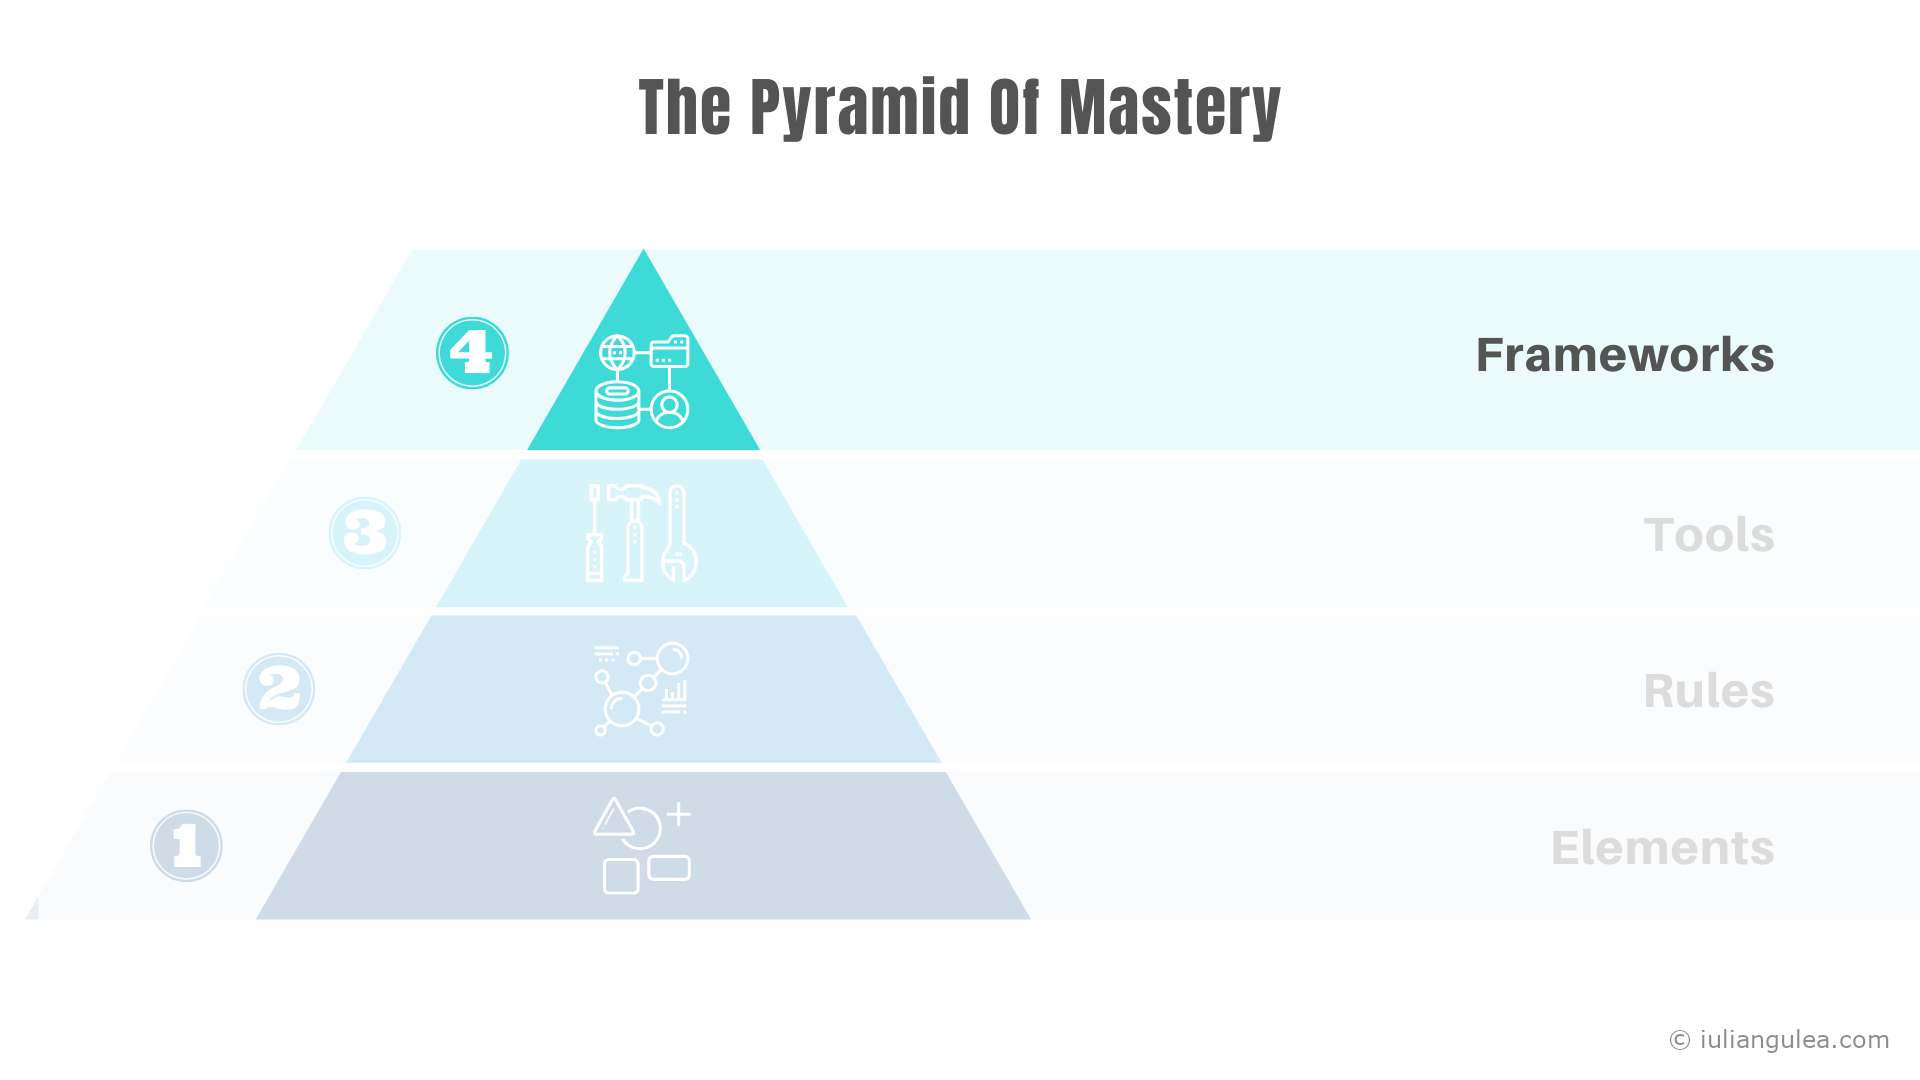 The Pyramid Of Mastery - The Frameworks